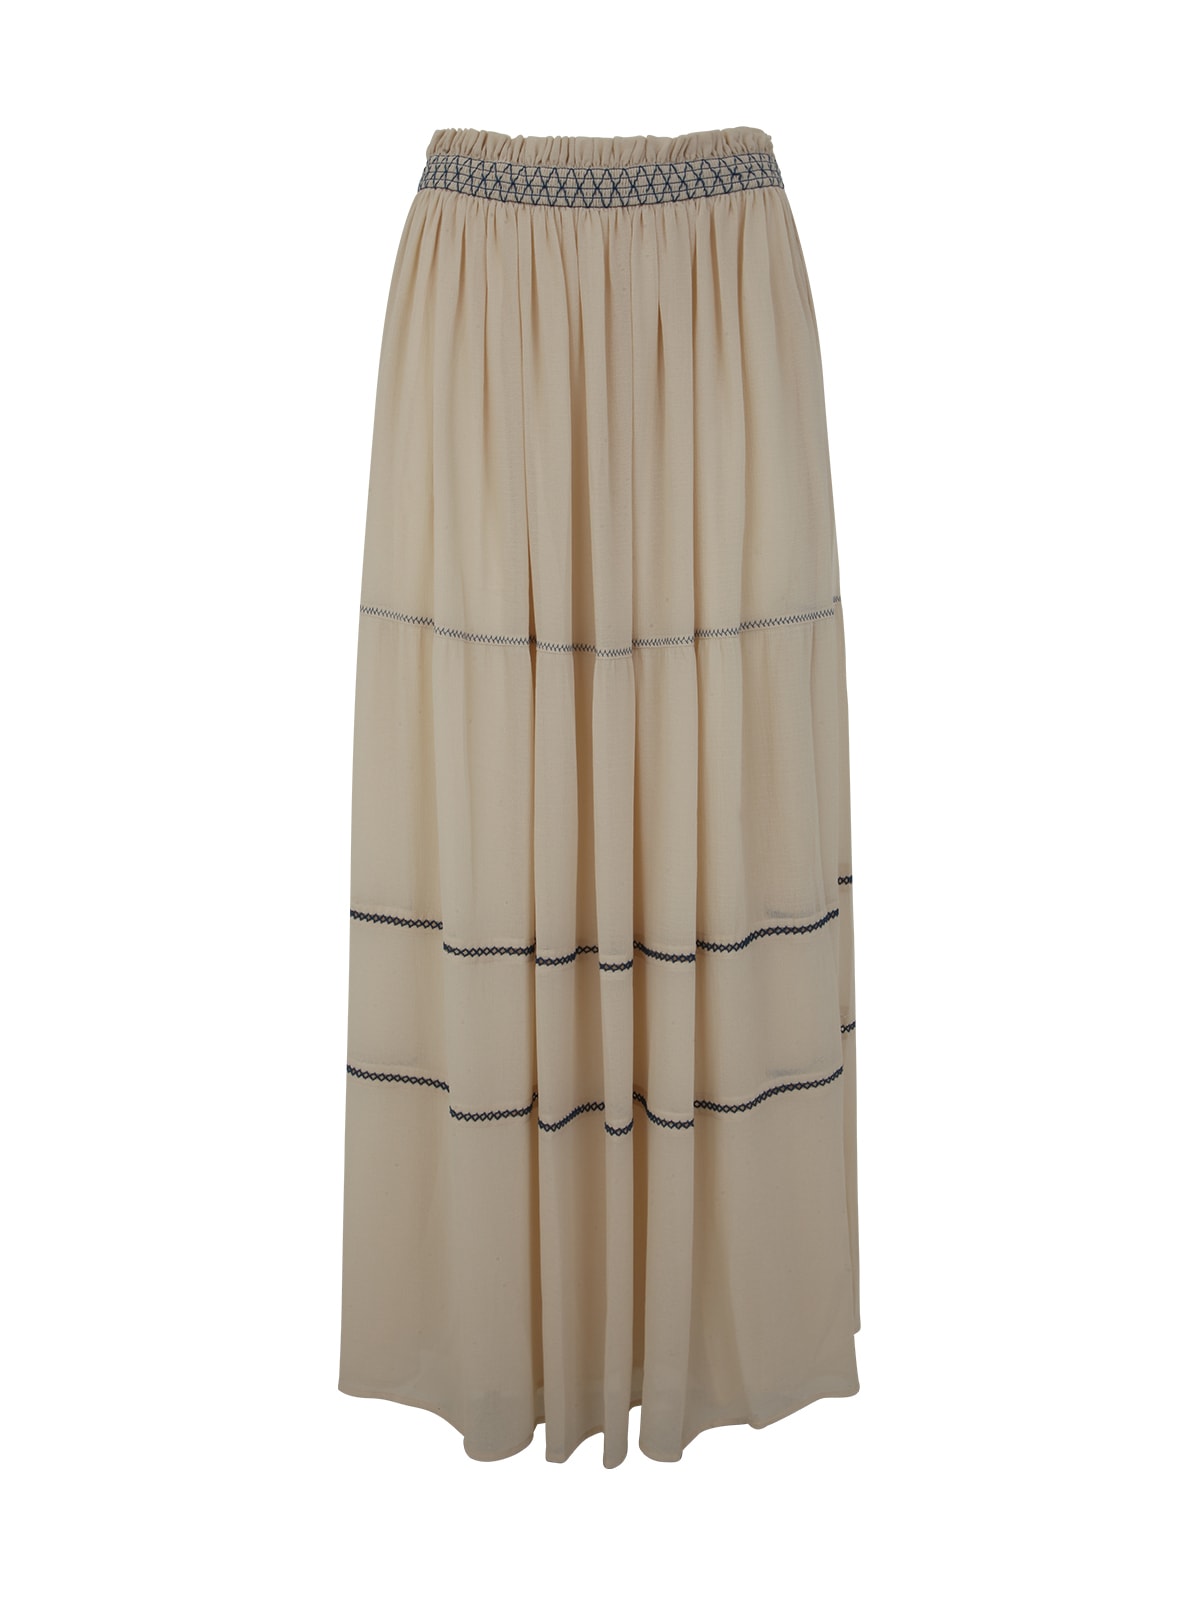 SEE BY CHLOÉ LONG PLEATED SKIRT